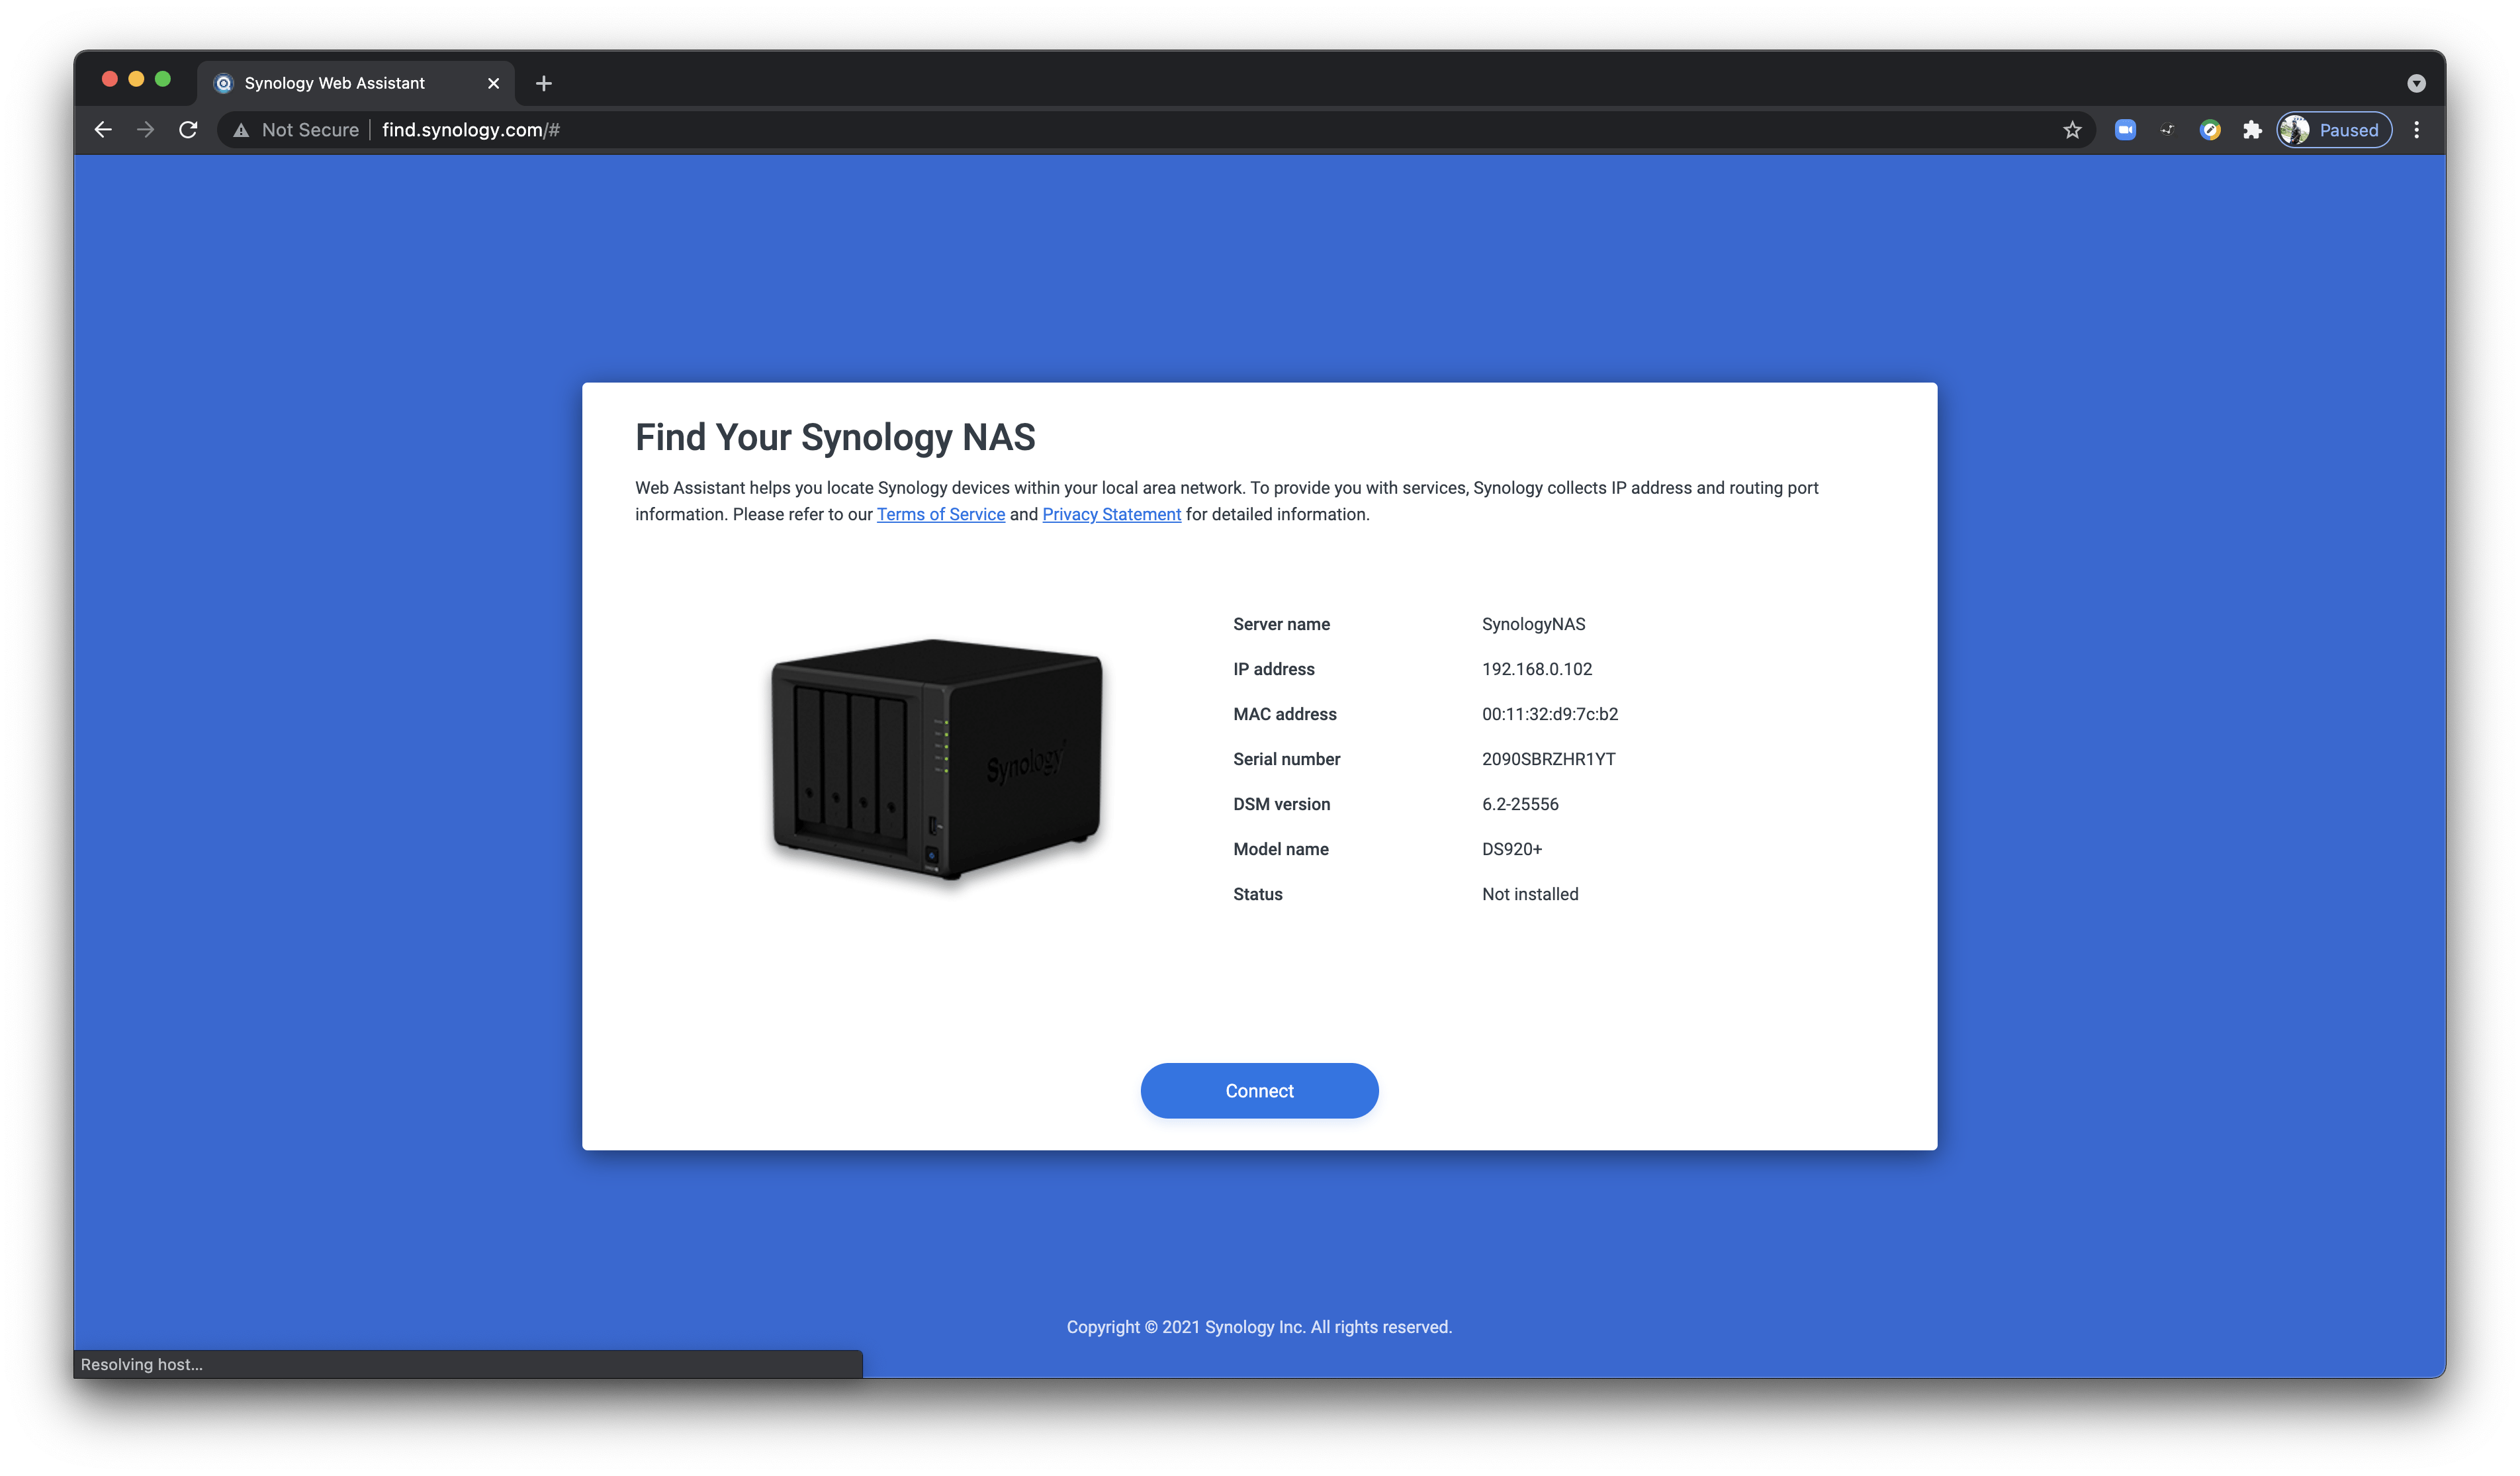 Synology NAS DS920+